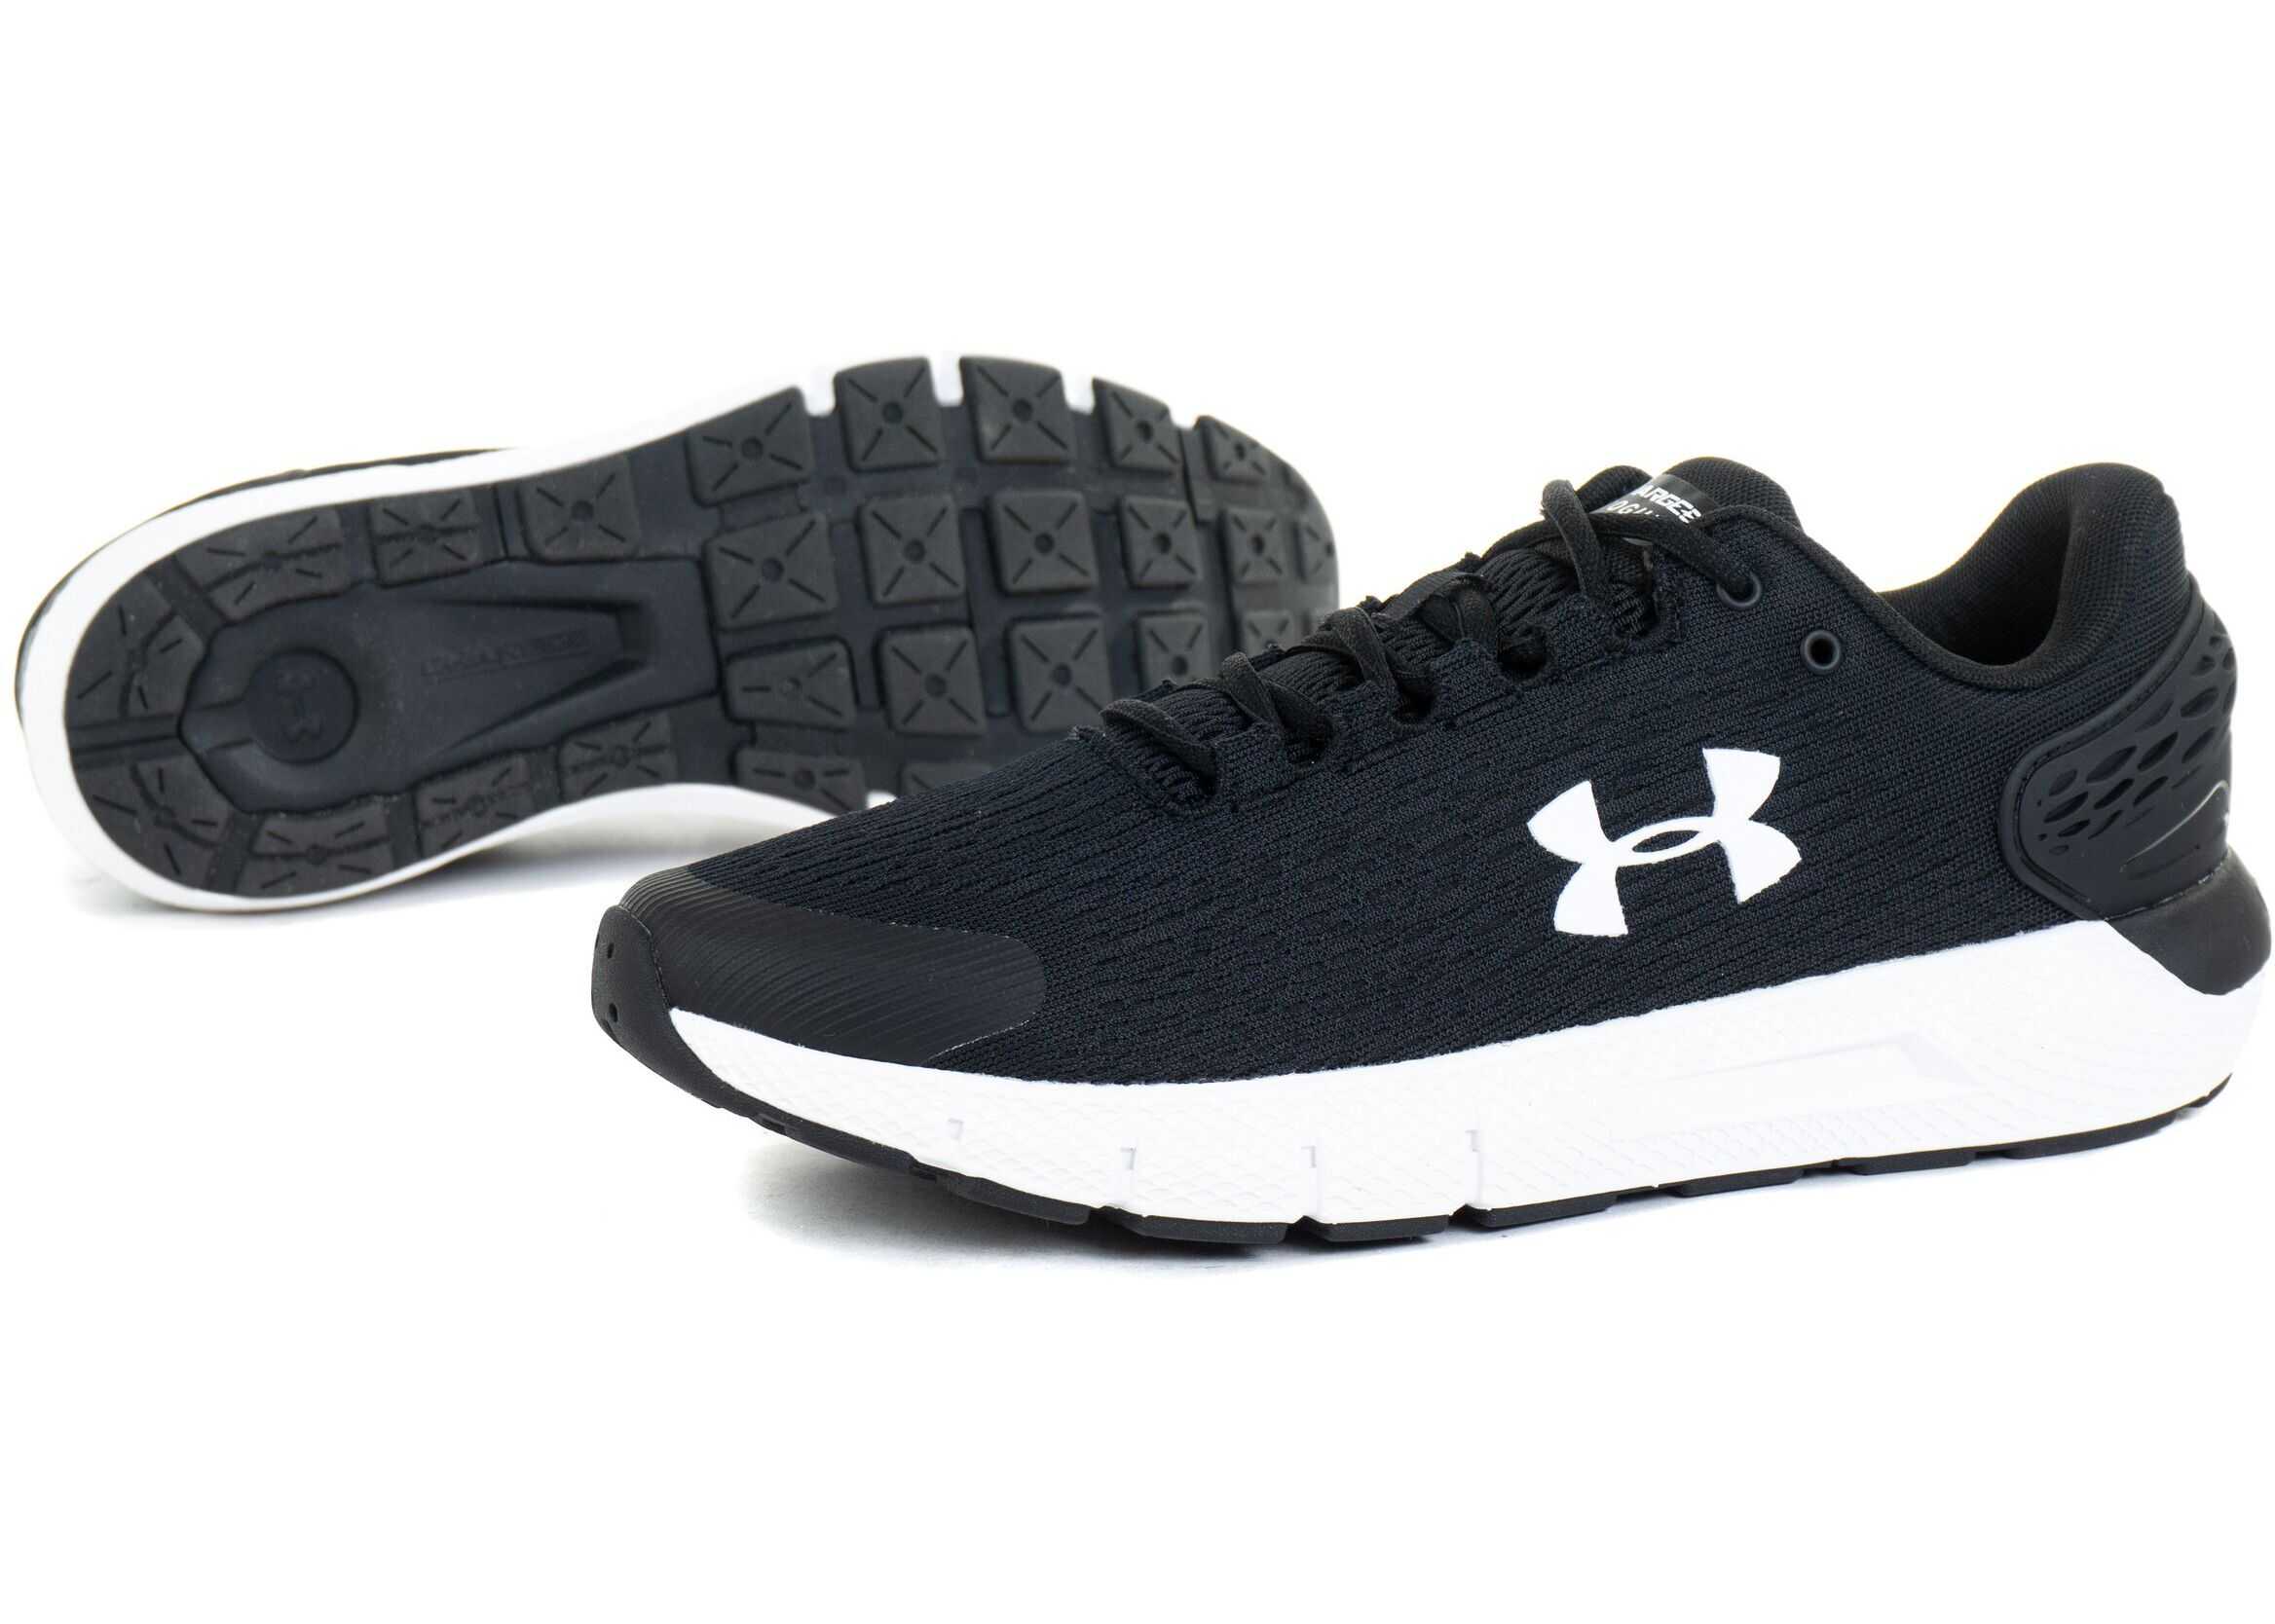 Under Armour Charged Rogue 2 Black